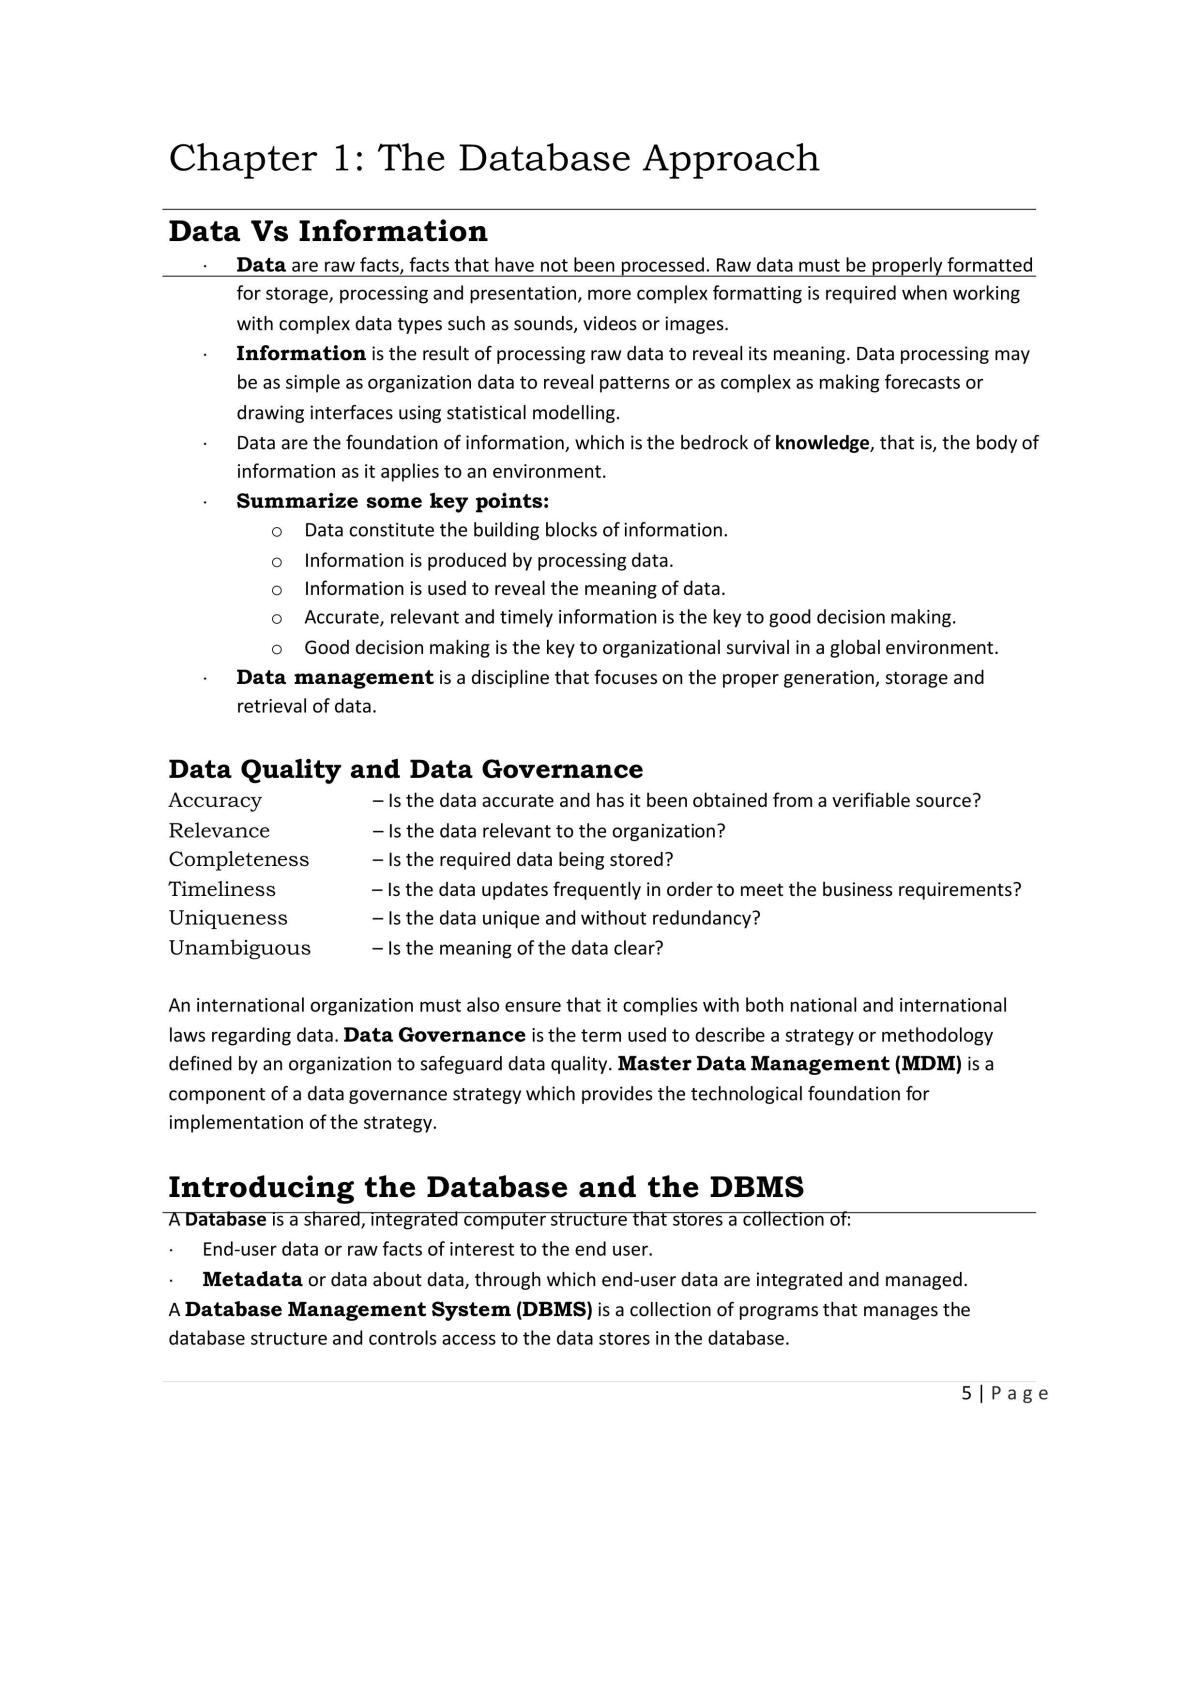 Bachelor of Science Honours in Computing Course Notes - Page 5